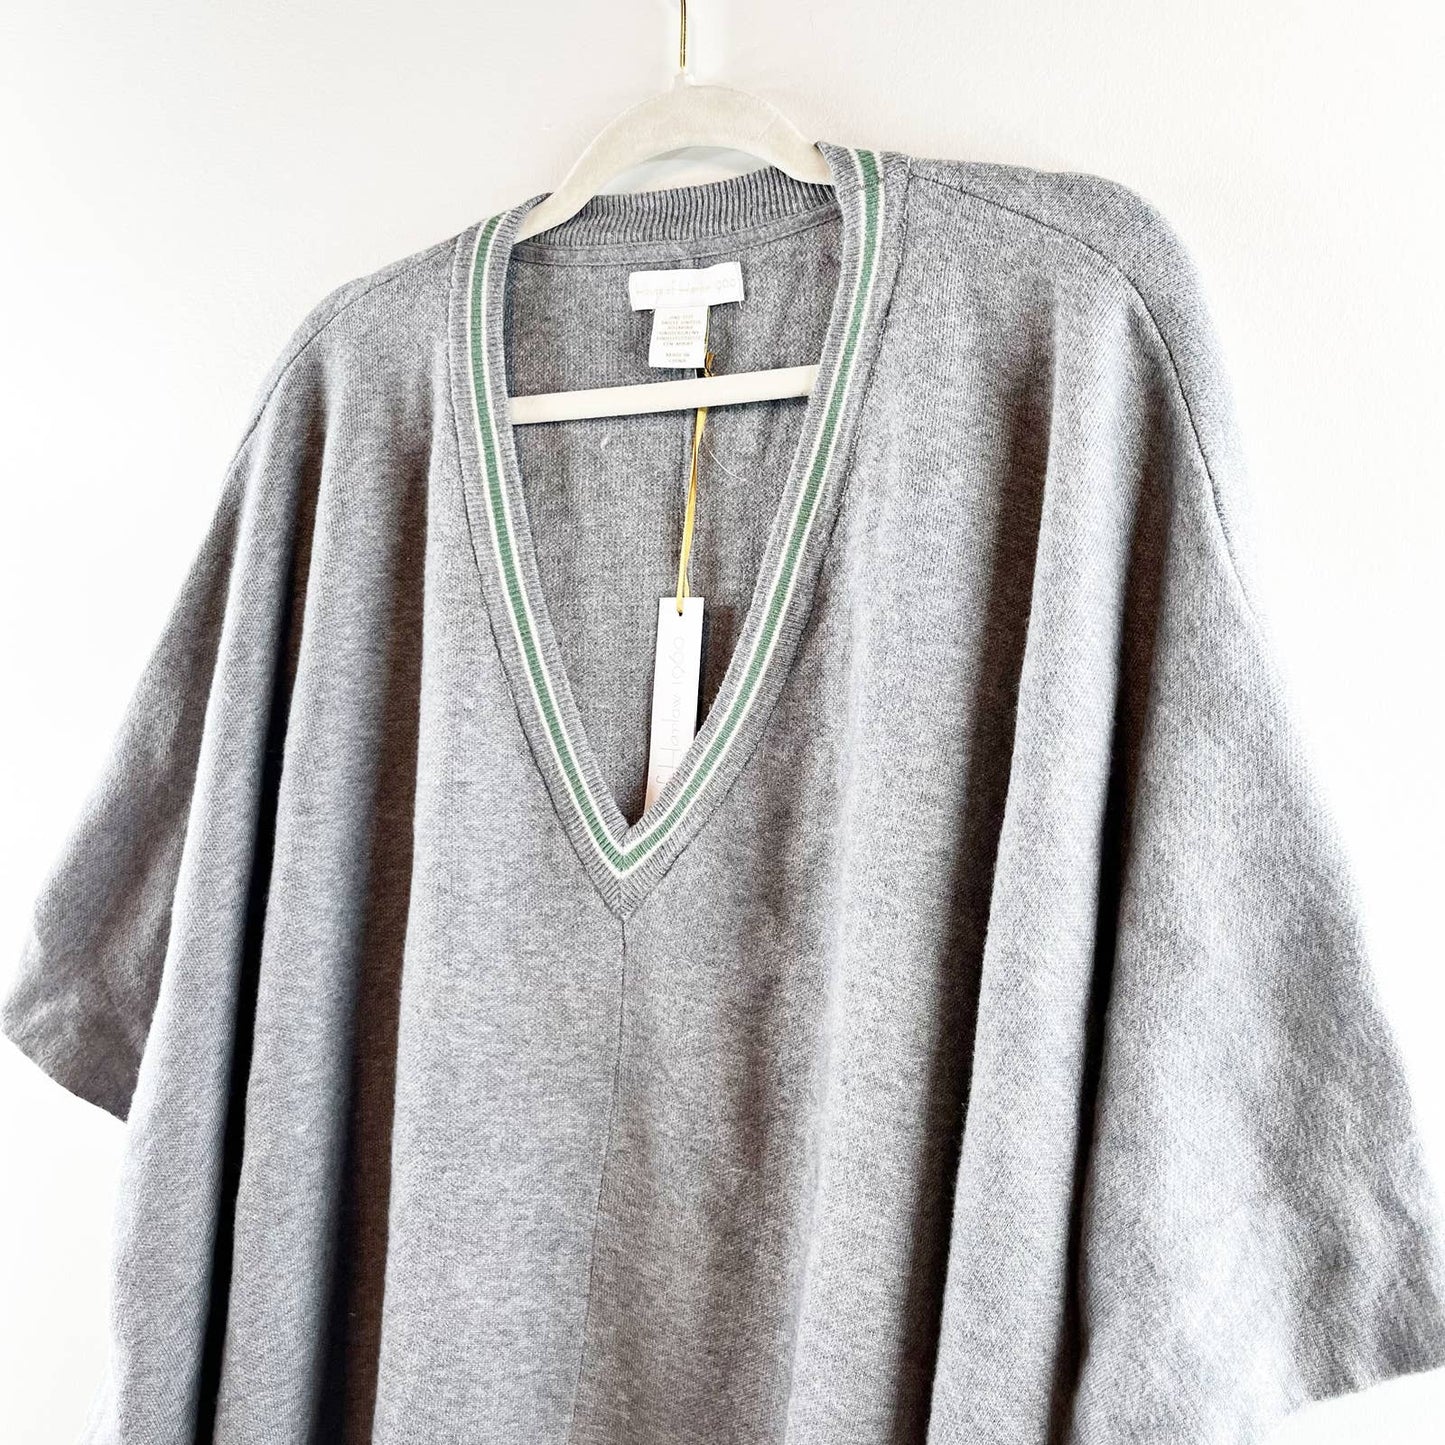 House Of Harlow 1960 Poncho Oversized V-Neck Sweater Pullover in Gray One Size